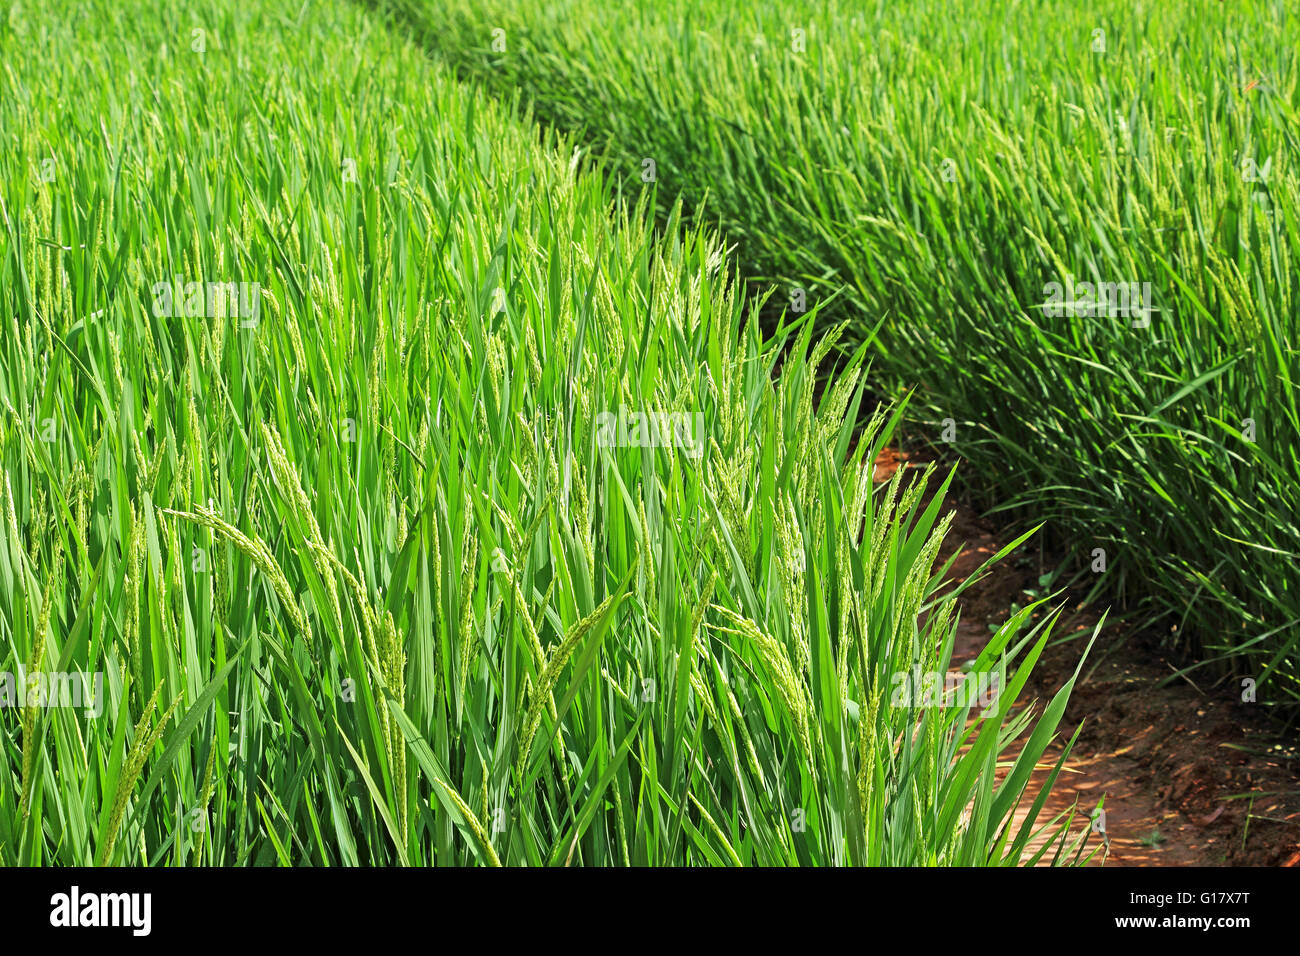 Maturing rice paddy plants in field from India Stock Photo